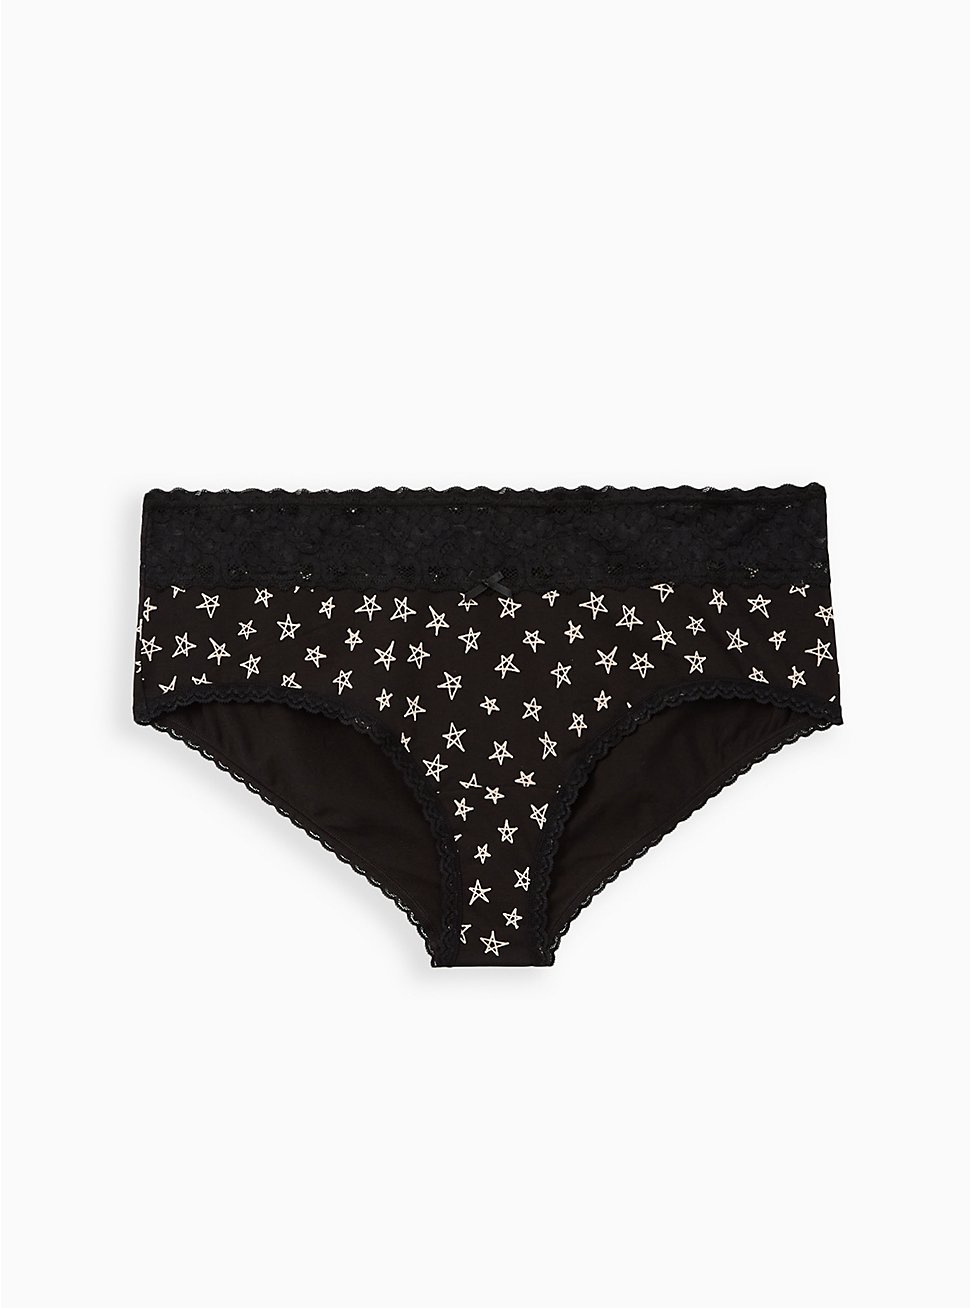 Black Stars Wide Lace Cotton Cheeky Panty, SKETCHY STARS, hi-res